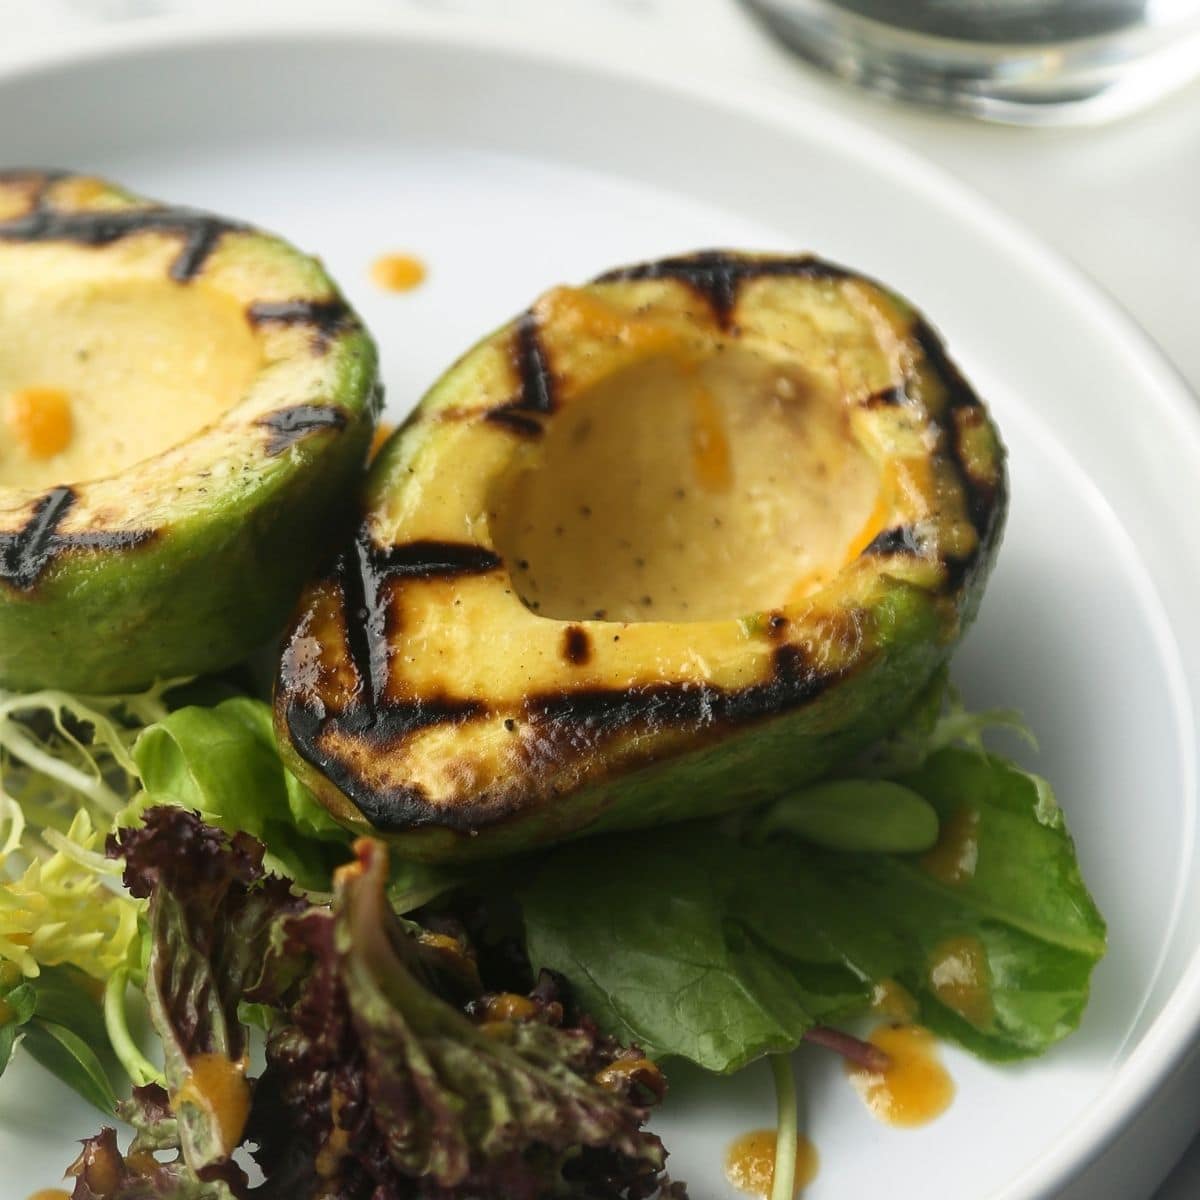 Grilled avocado halves showing grill marks